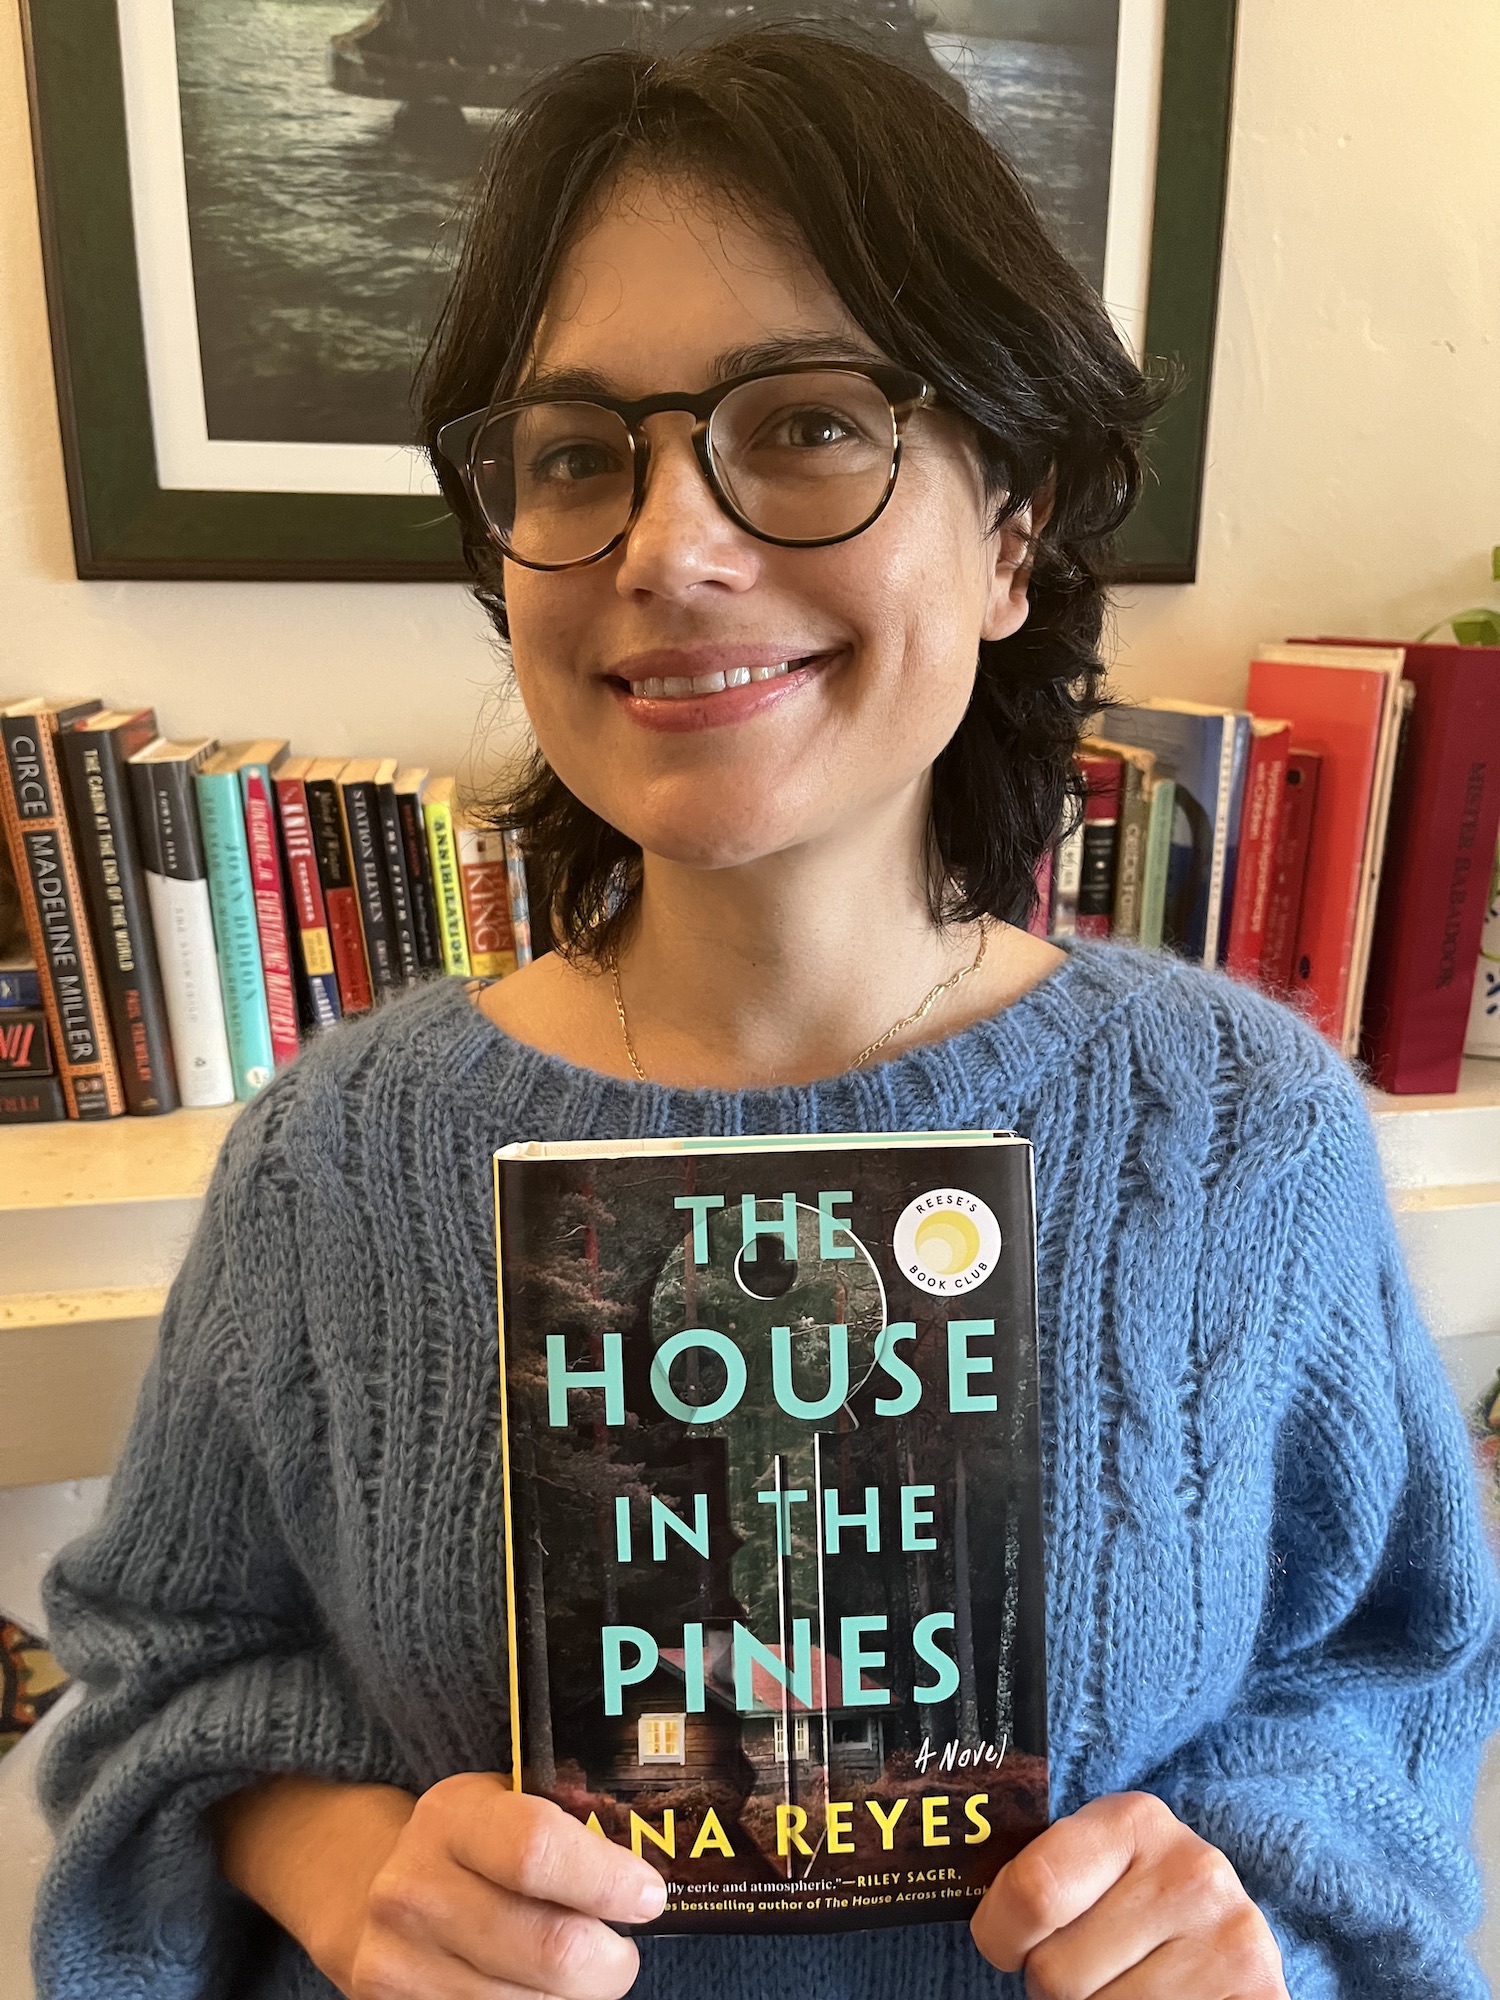 Author Ana Reyes poses with her new book 